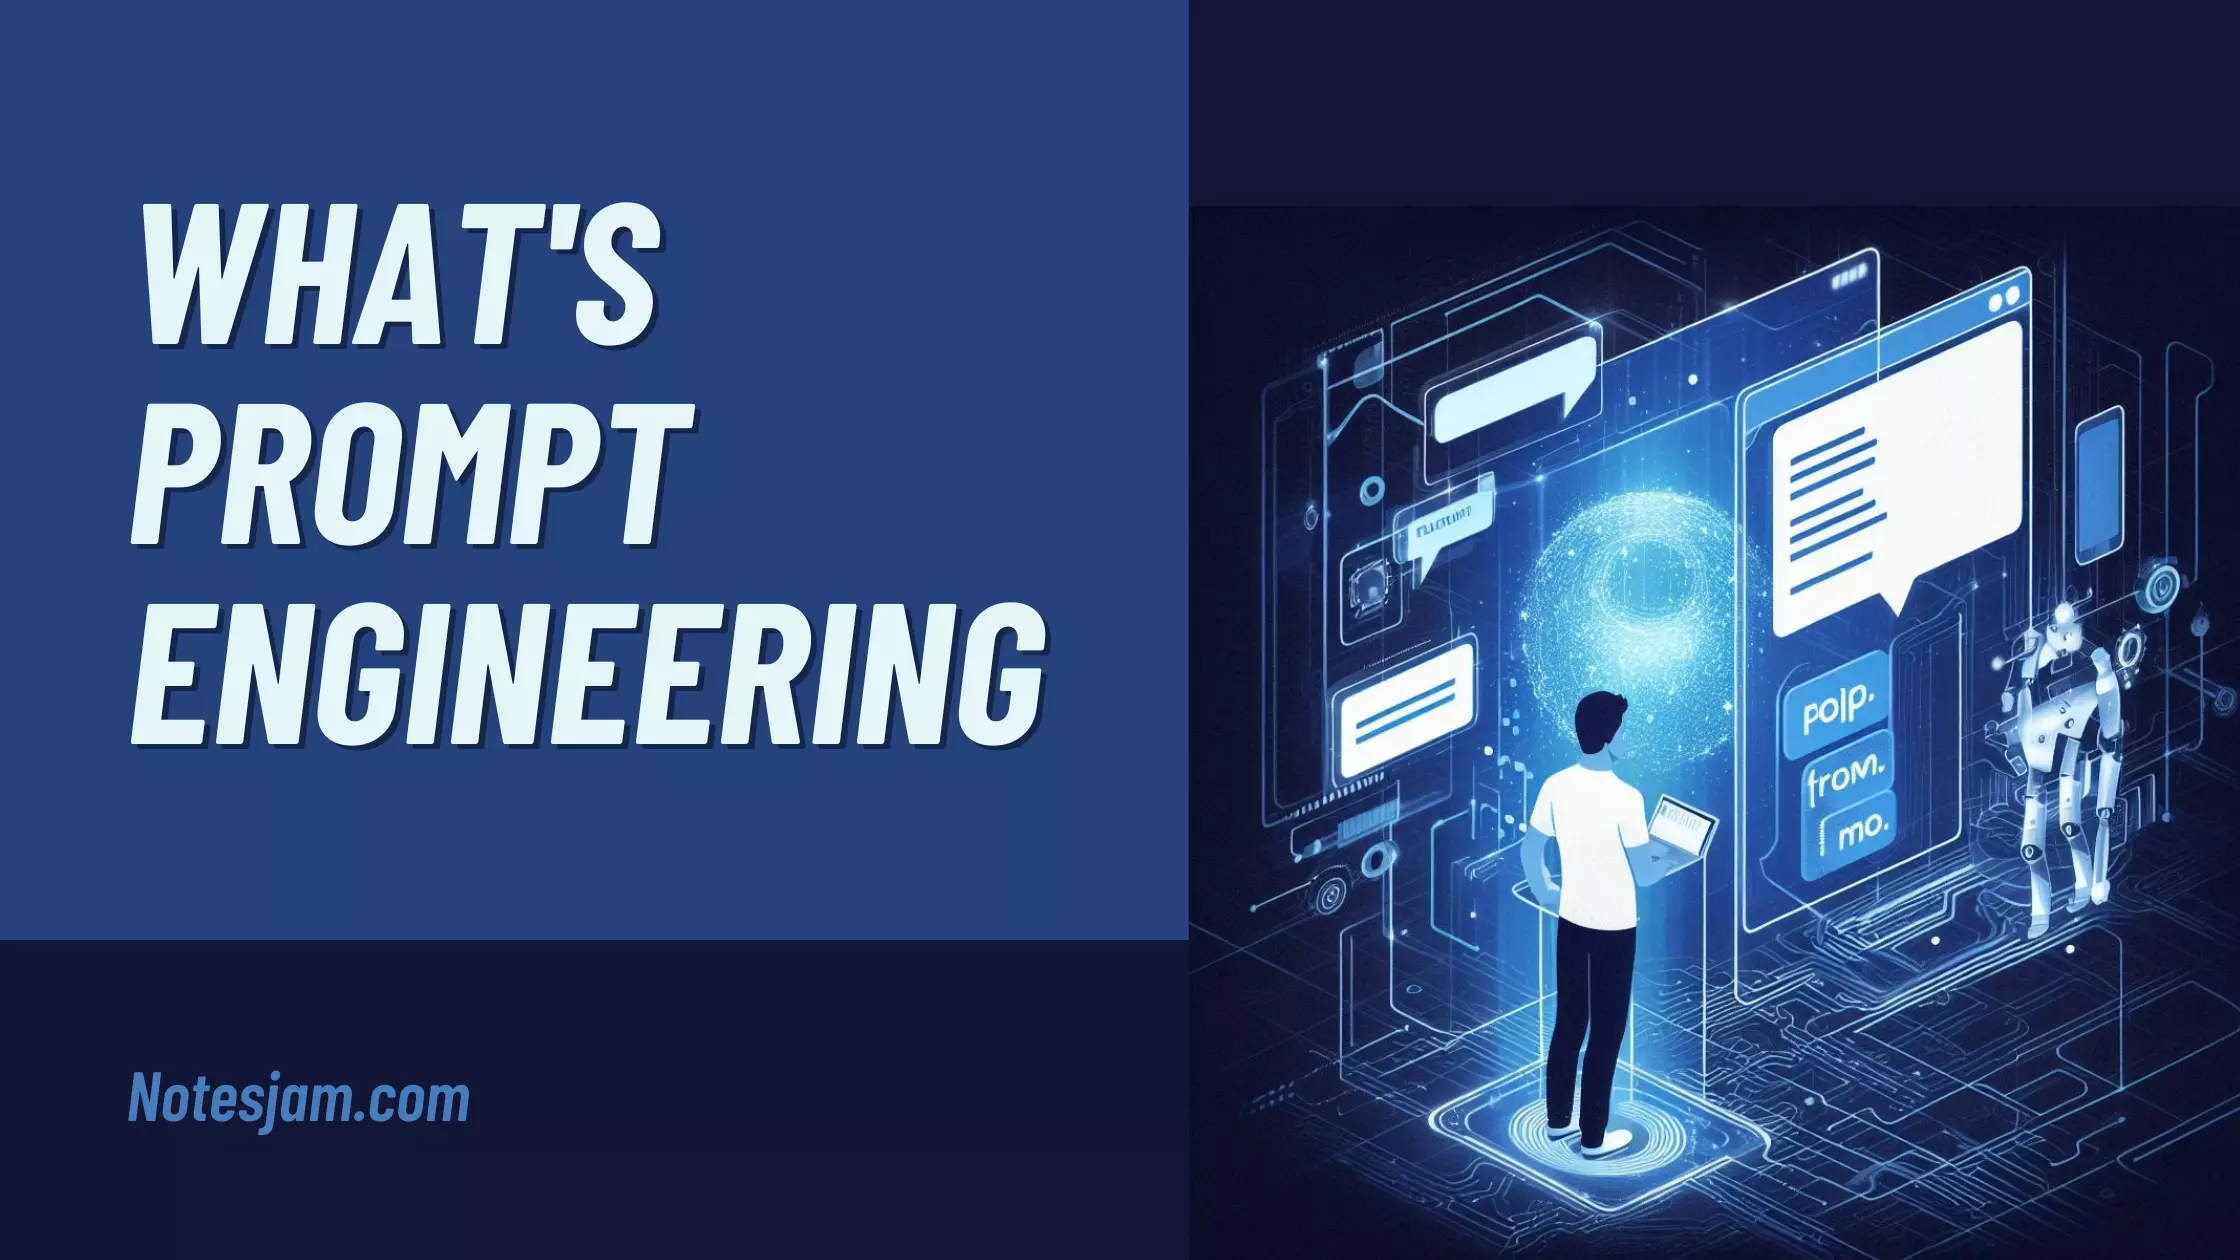 What is prompt engineering